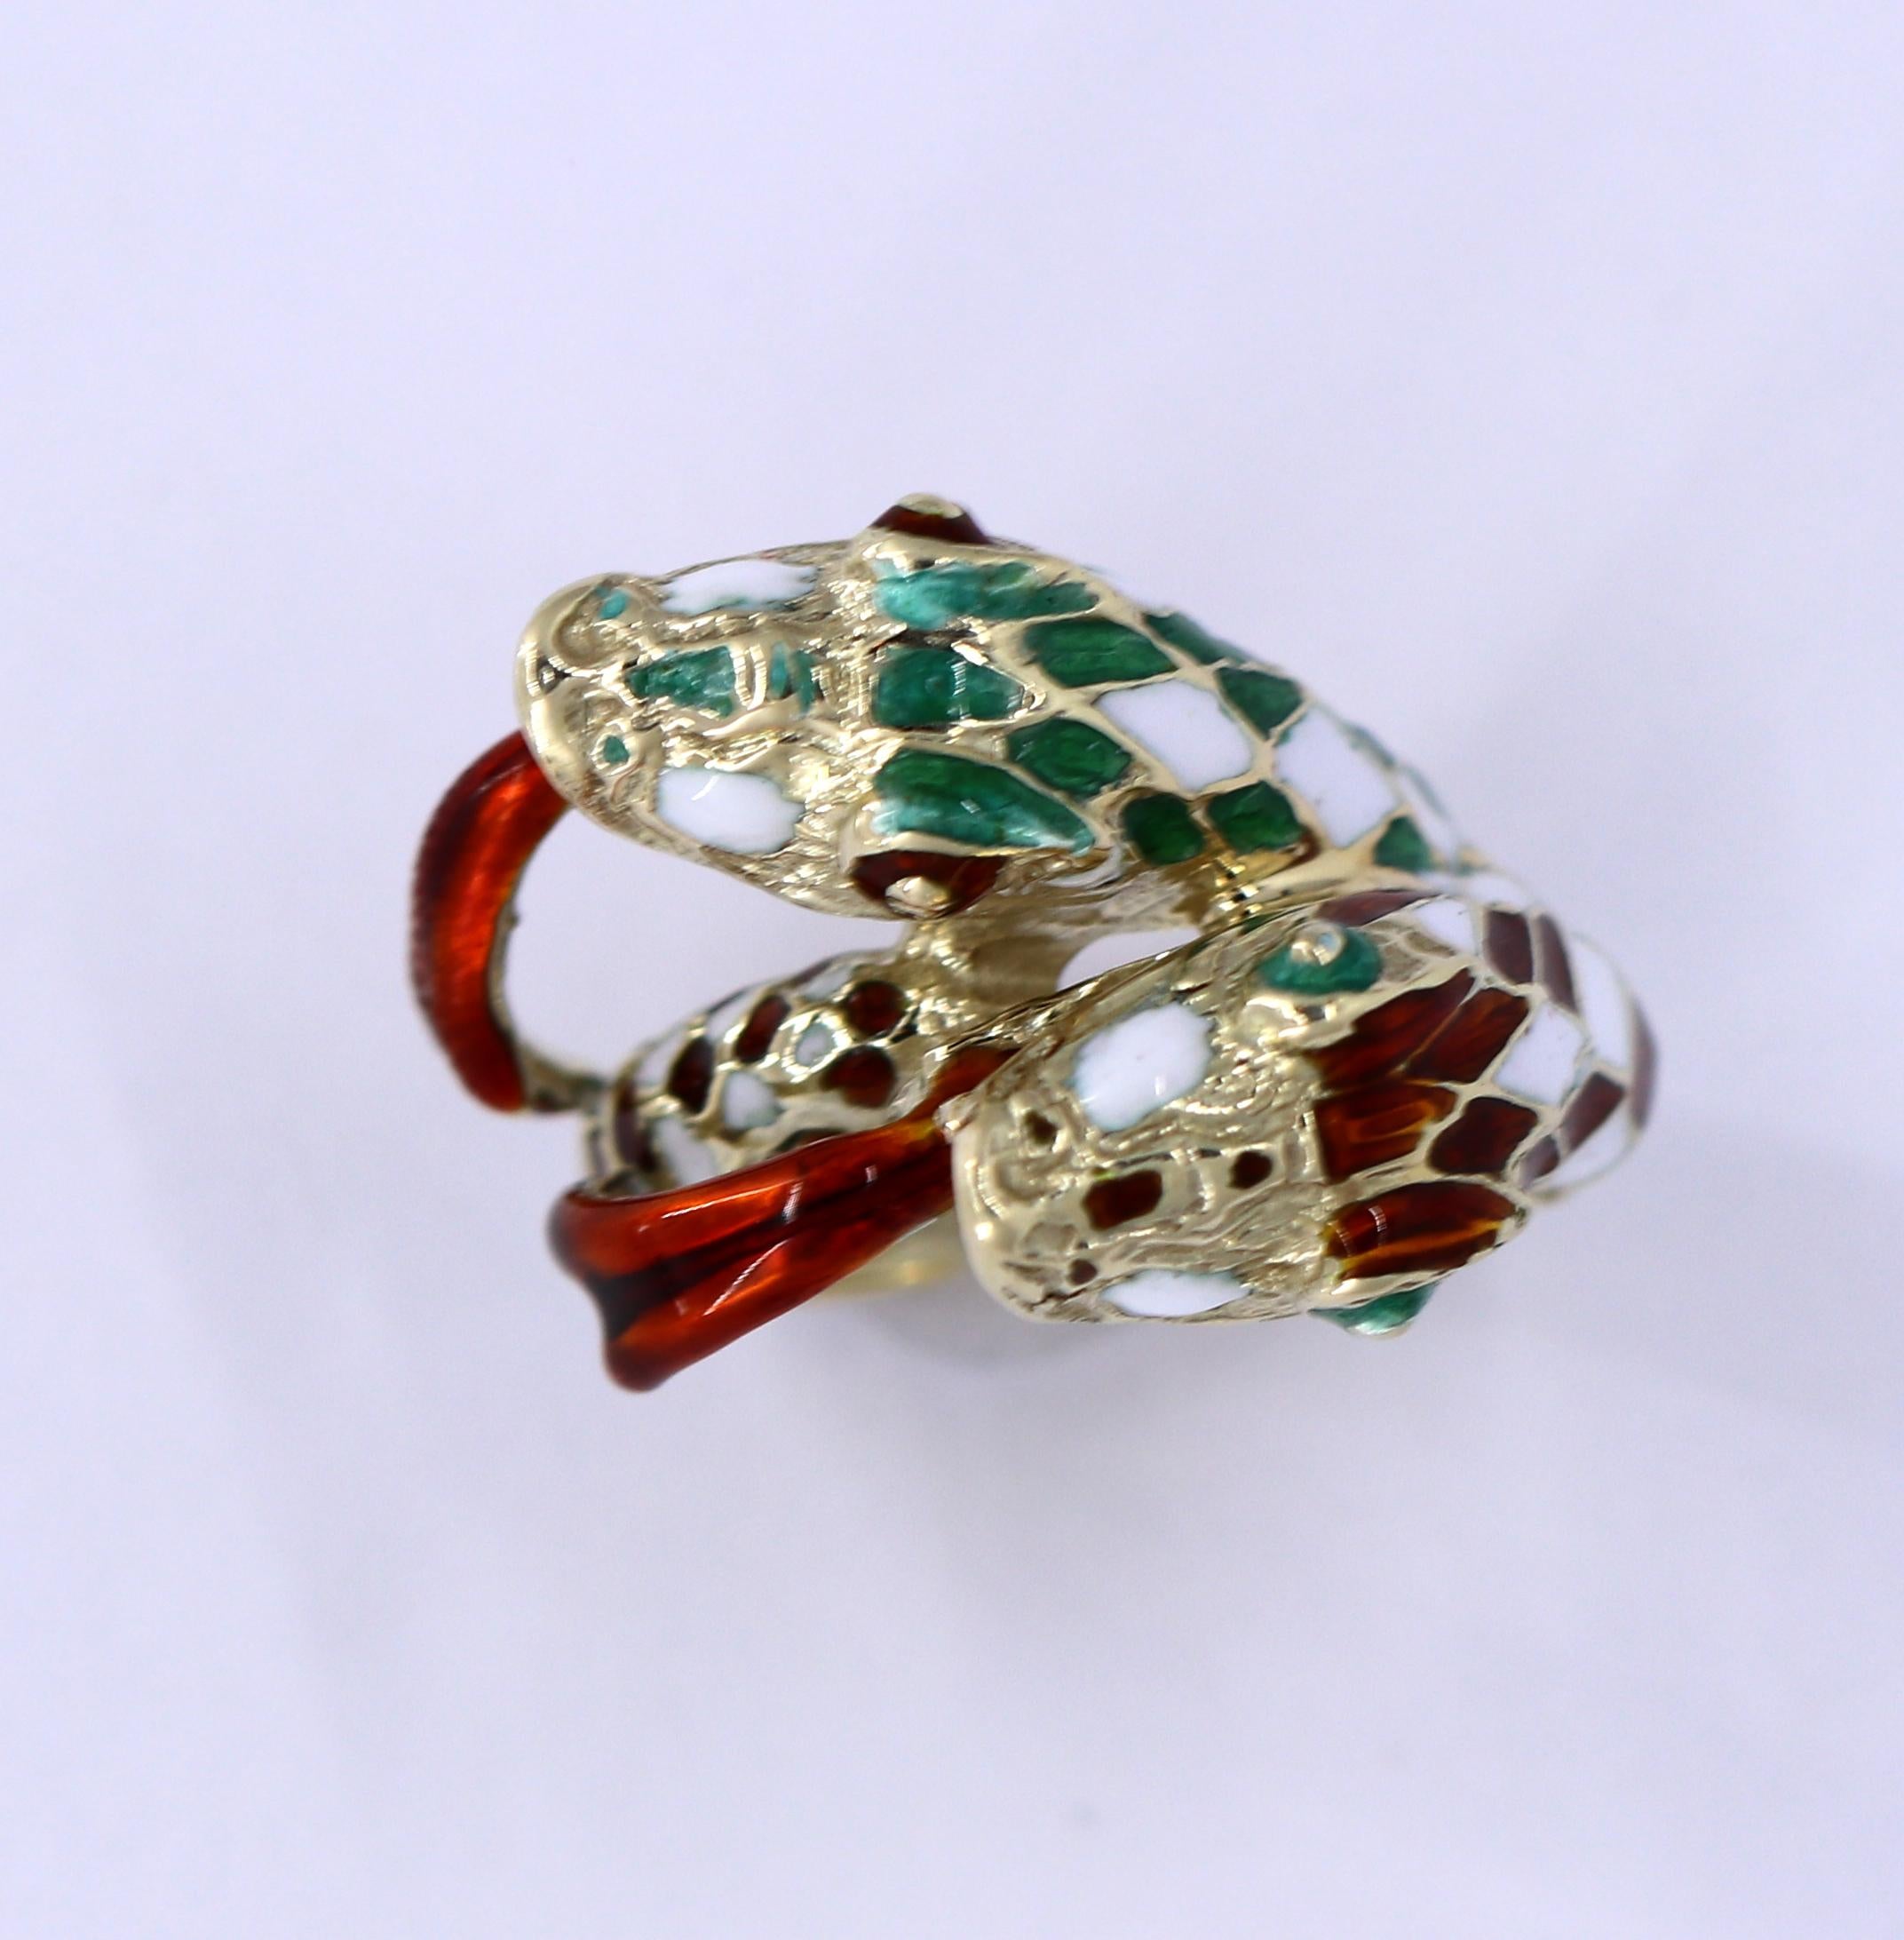 An 18K yellow gold ring centered around a double headed, mythical snake. With multi-colored enameled scales, the colorful serpent features burgundy/red, green, and white. Tapering in width from 1/4 inches wide at the base up to 5/8 of an inch at the